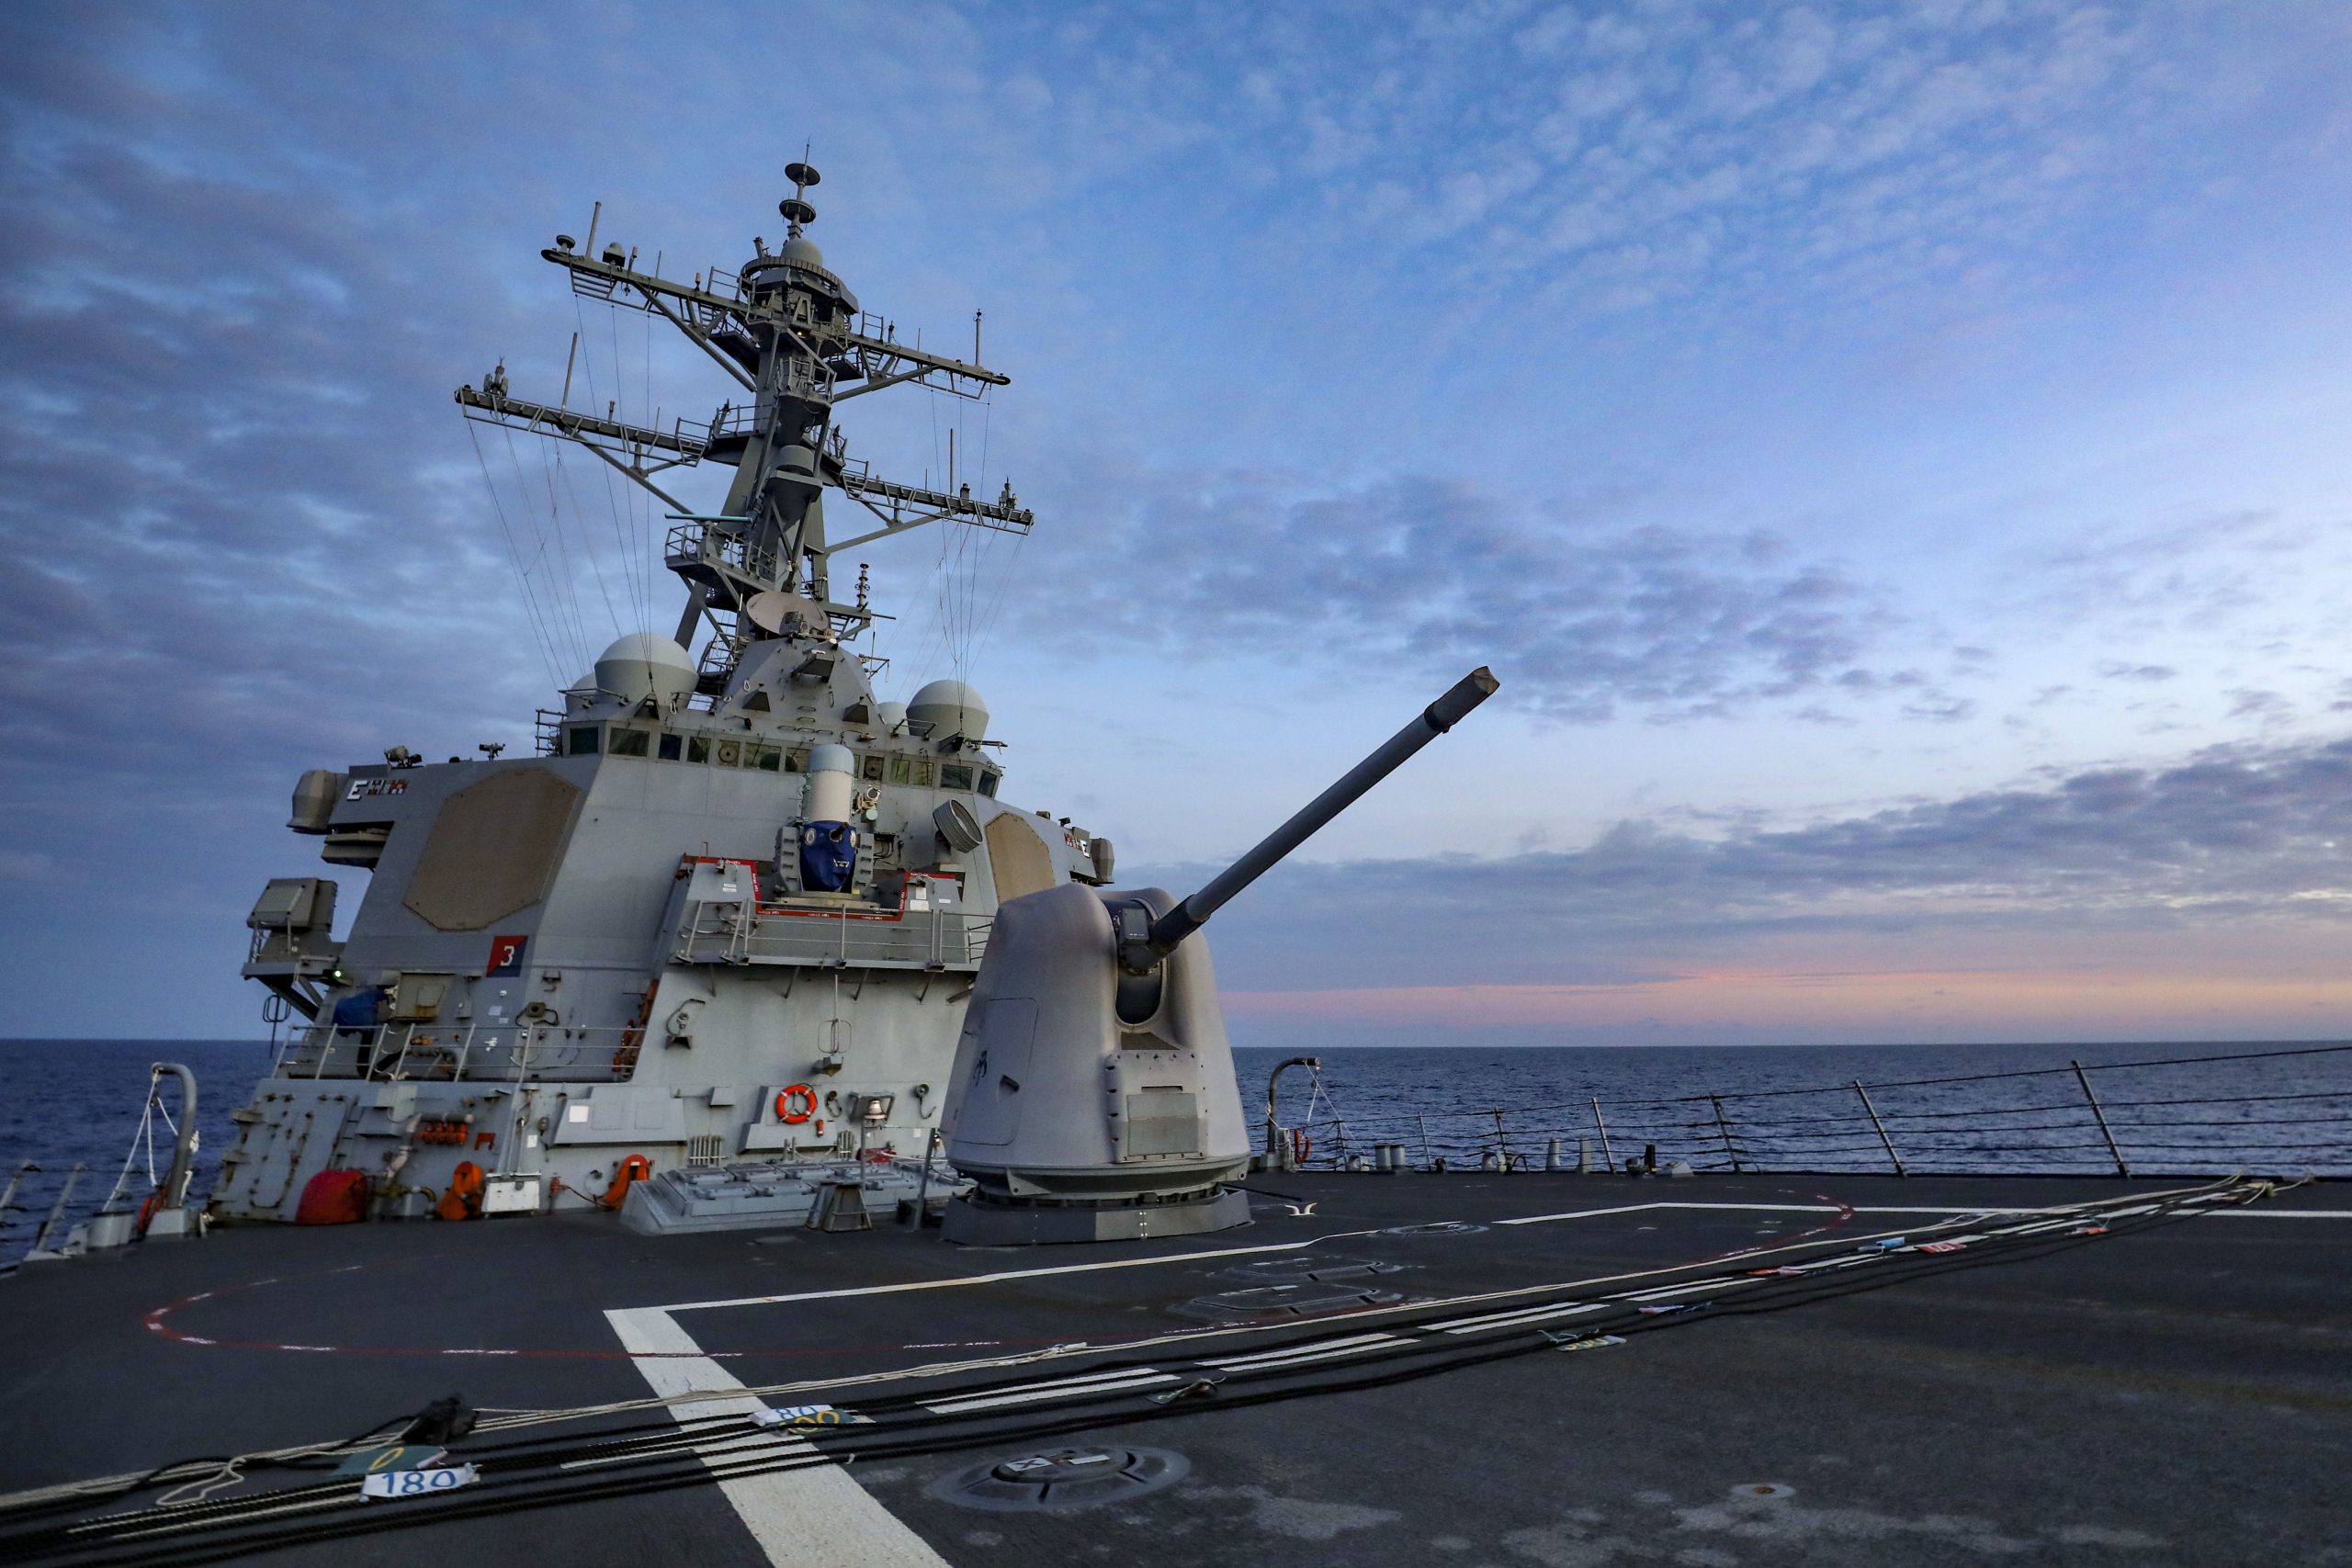 U.S. destroyer challenges China’s unlawful, excessive claim of South China Sea